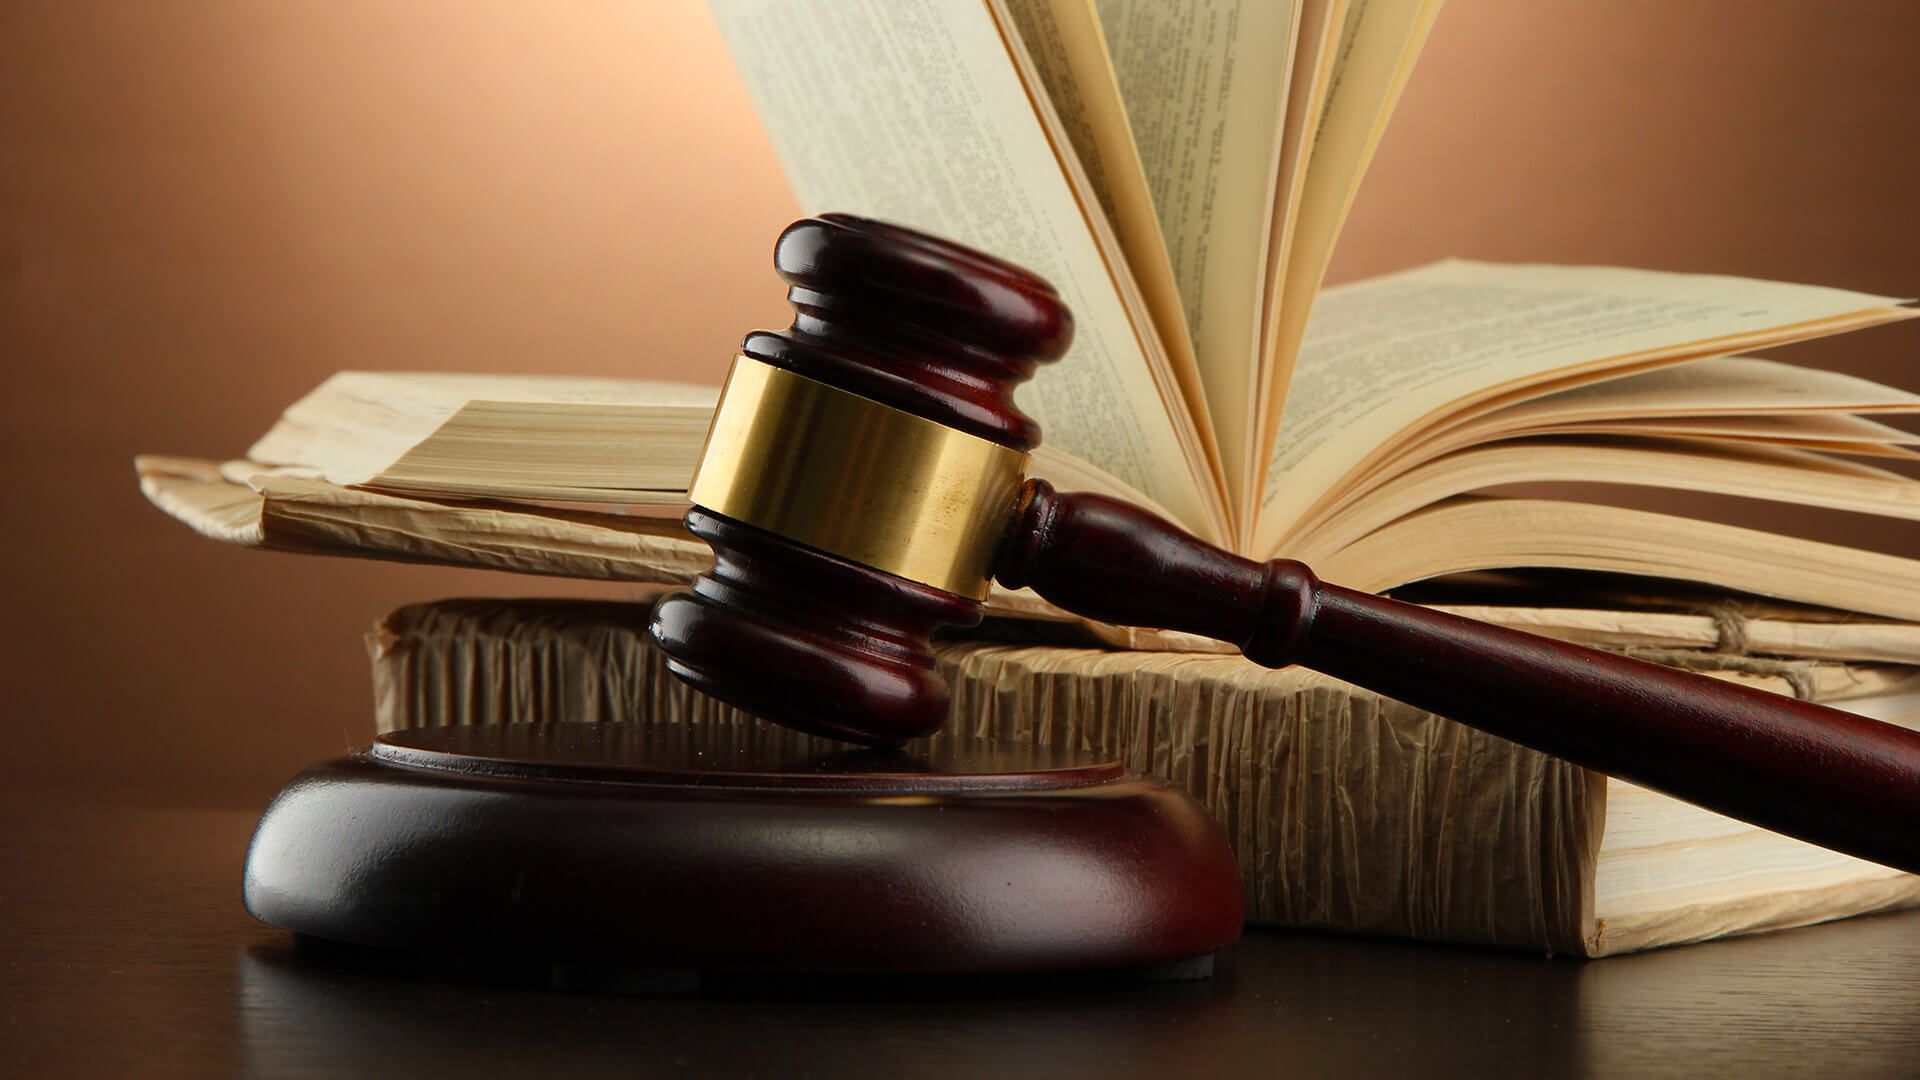 BrightEdge and Searchmetrics settle patent infringement lawsuit